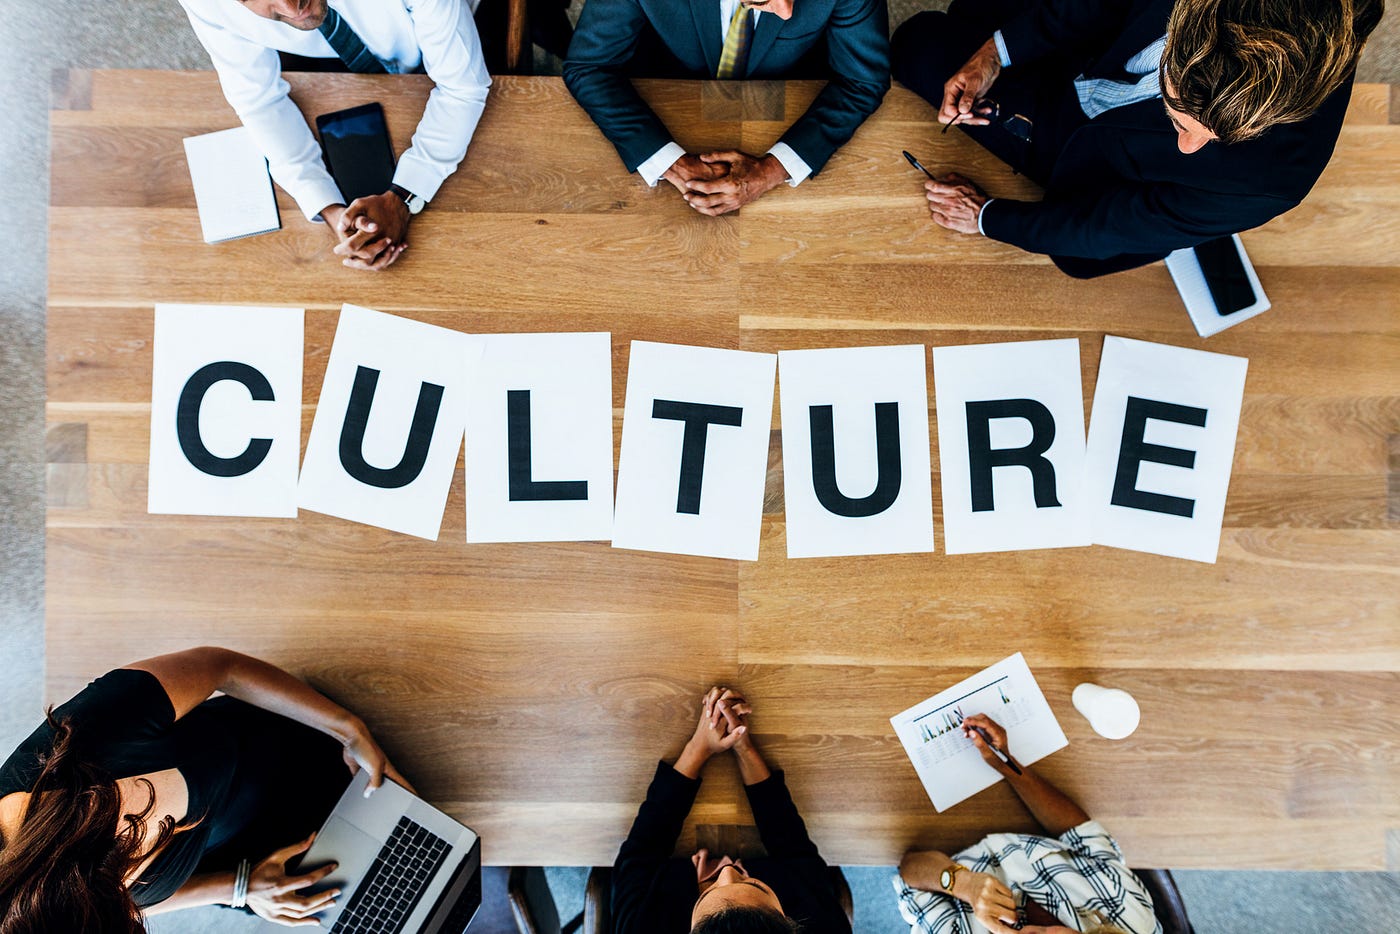 How to avoid the cultural misunderstandings that can impact your business |  by Alison Rhoades | WAAT Ltd | Medium